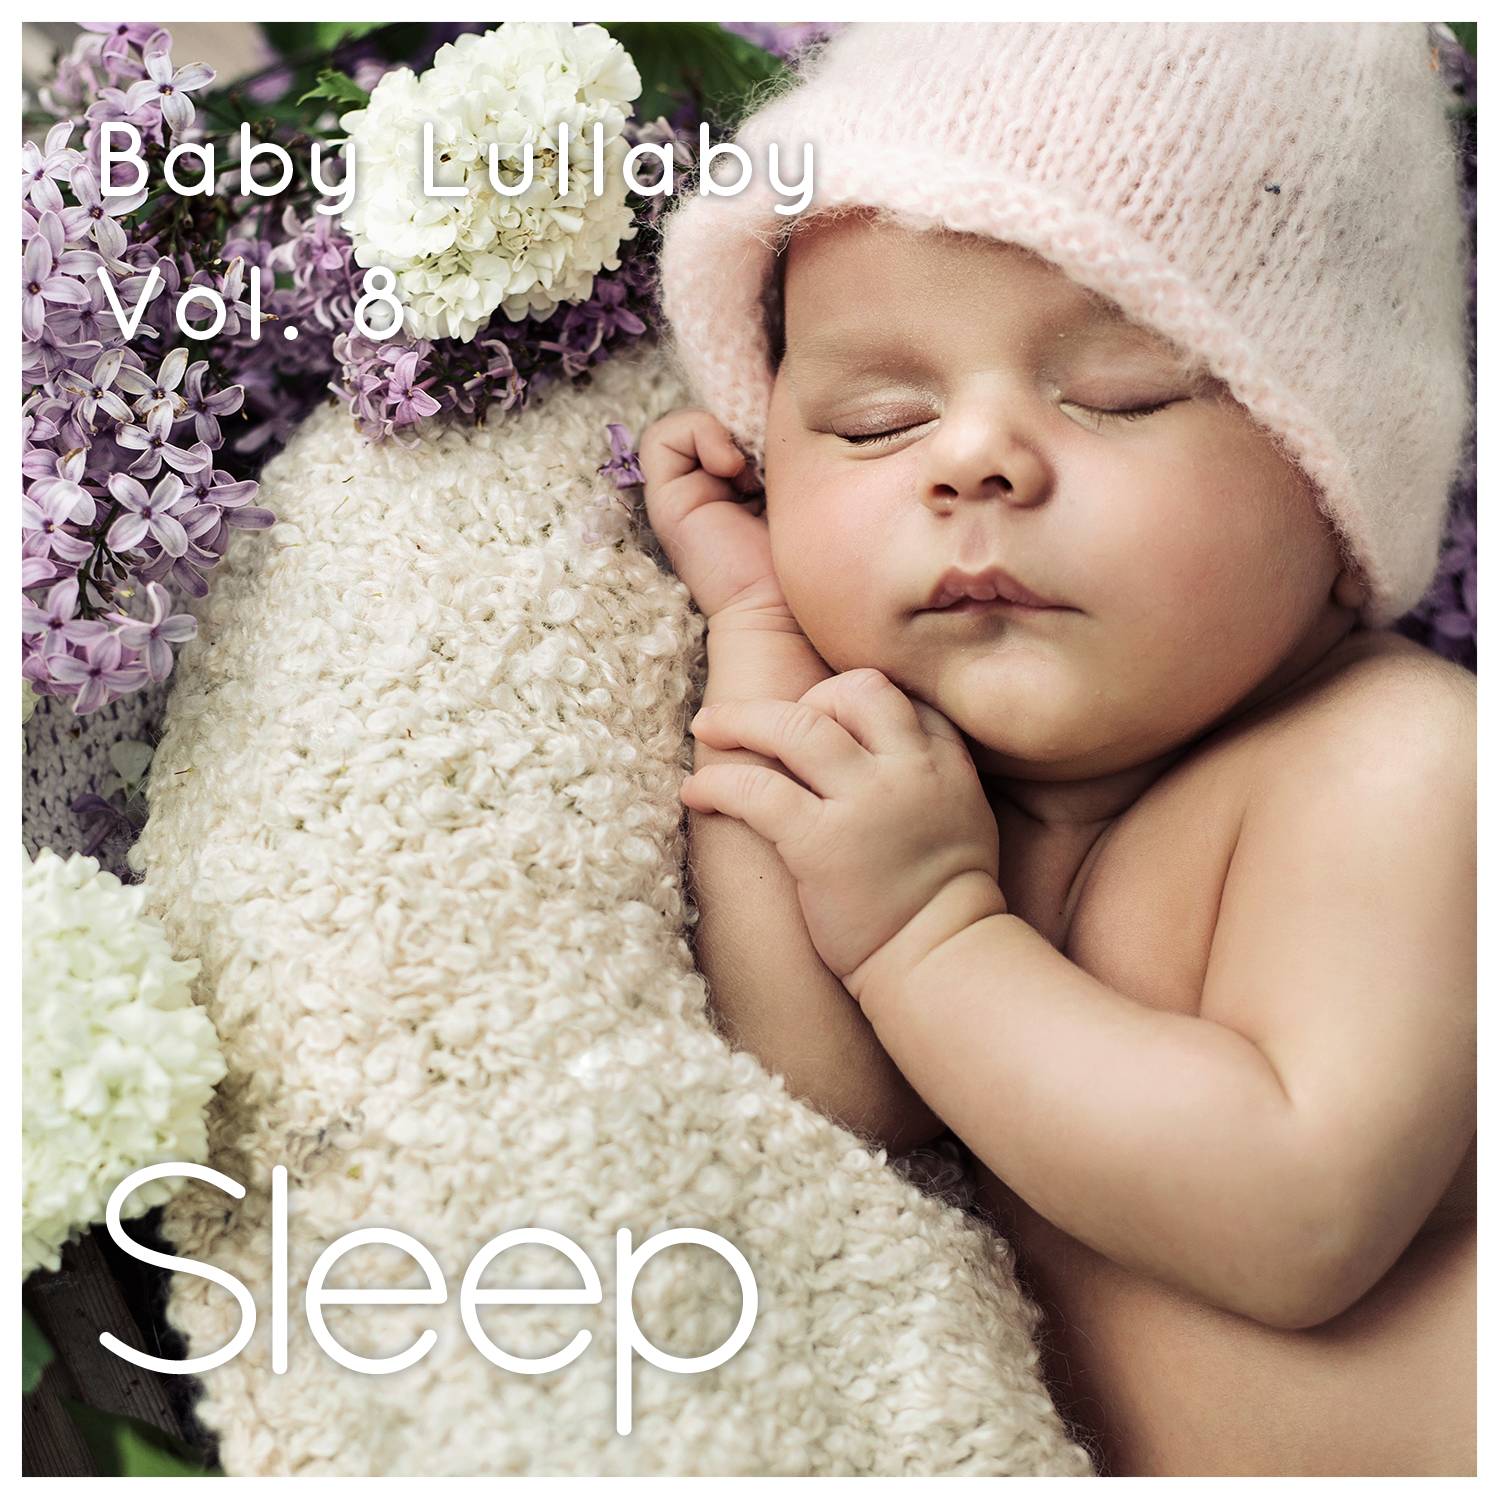 Baby Sleep Ambient Lullaby, Pt. 39